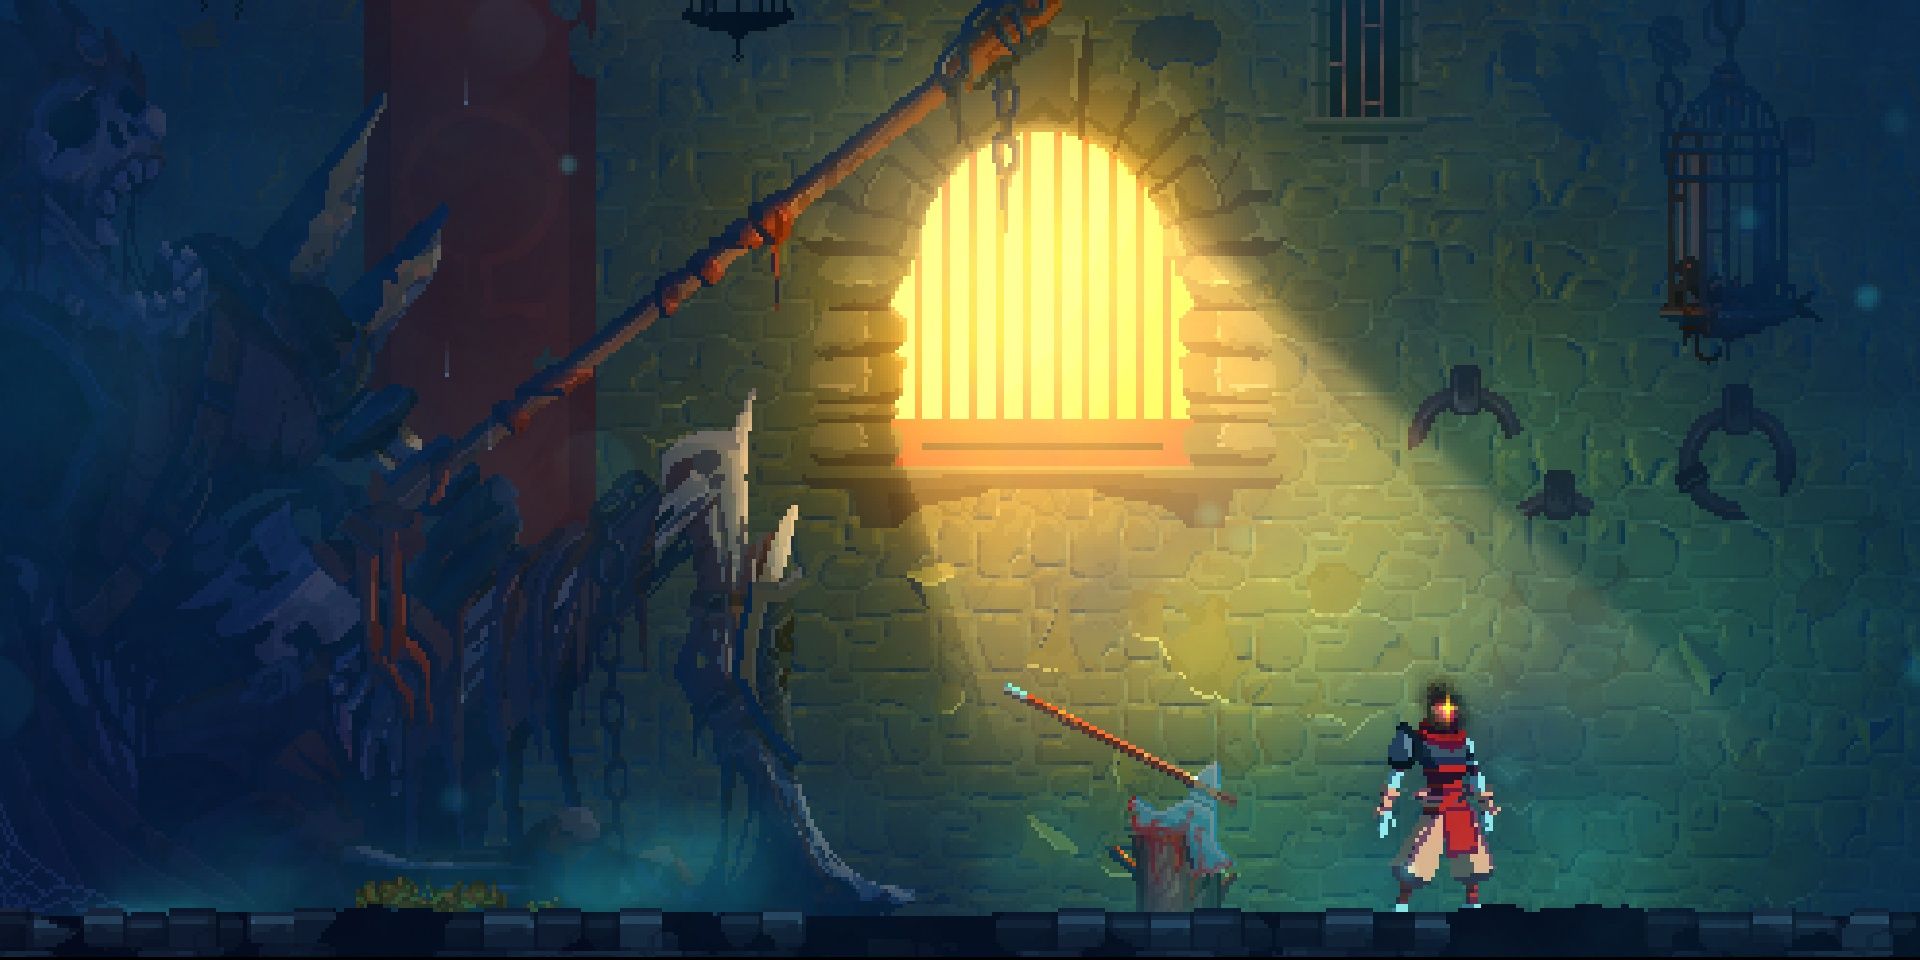 A screenshot showing gameplay in Dead Cells